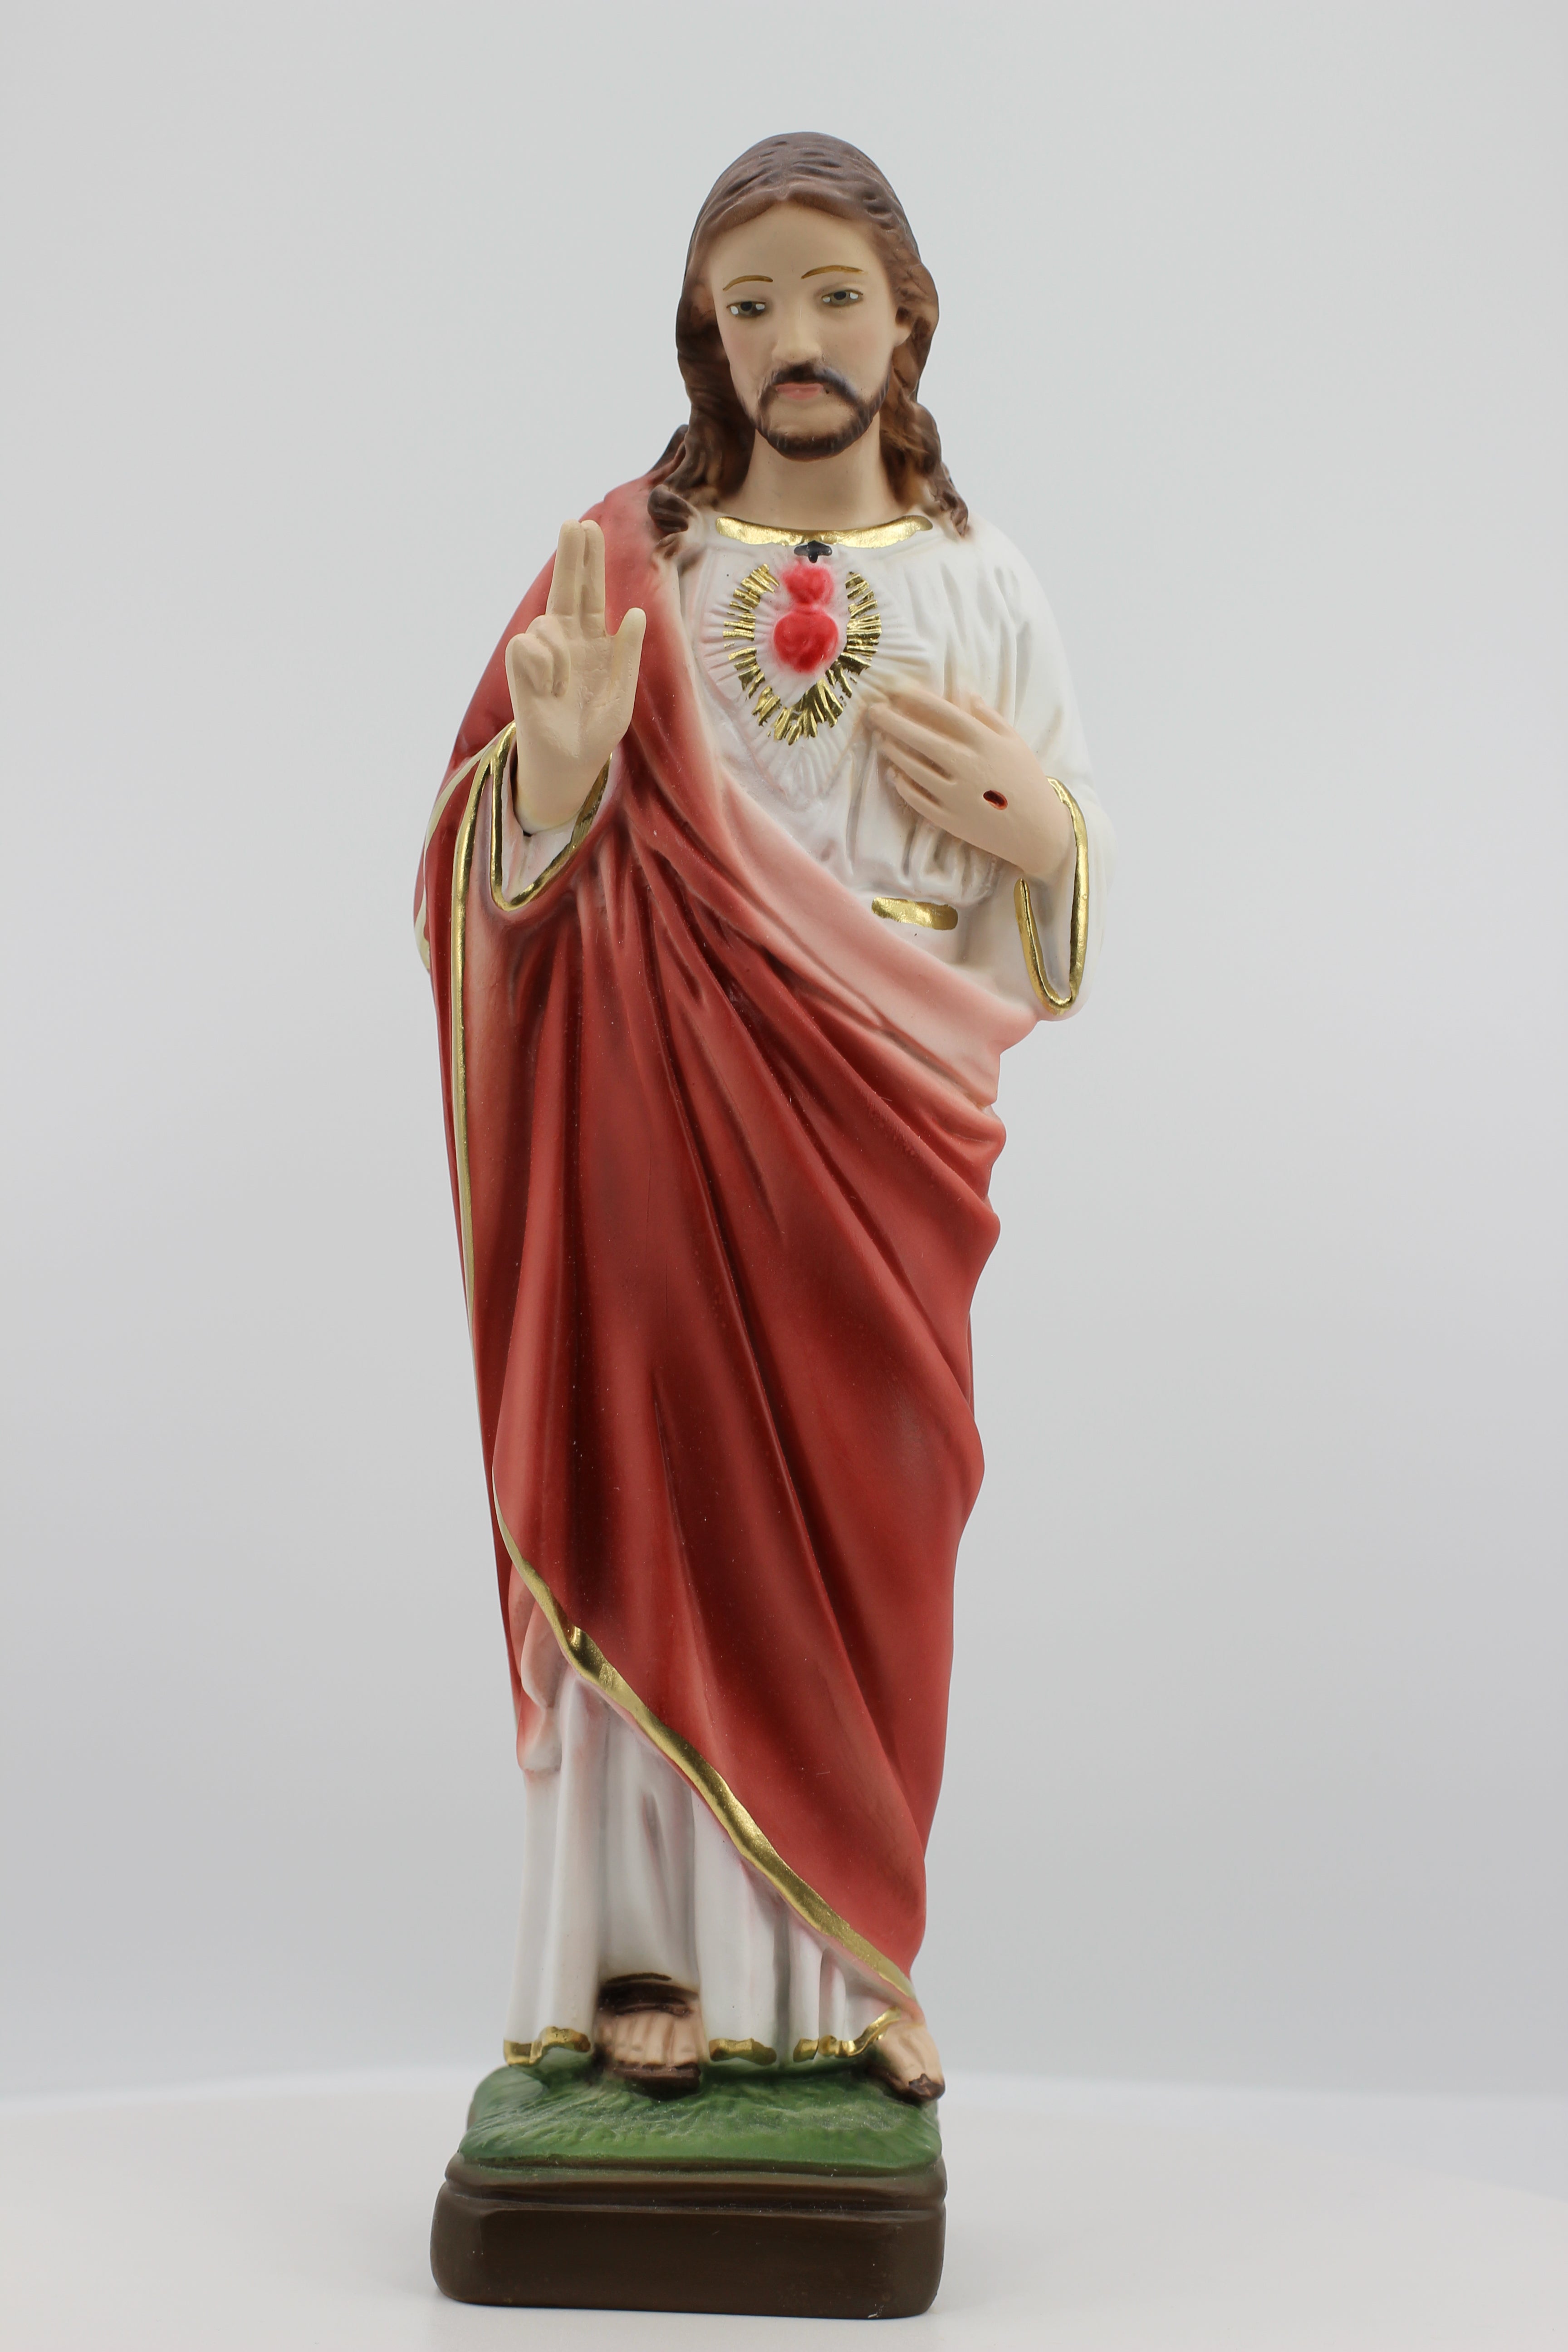 Buy Breeze Handicrafts Christian Gift Polyresin Statue of Jesus and Holy  Communion Gift to Boy Statue Catholic Religious Showpiece Decor PRST  015B,Multicolor Online at Low Prices in India - Amazon.in